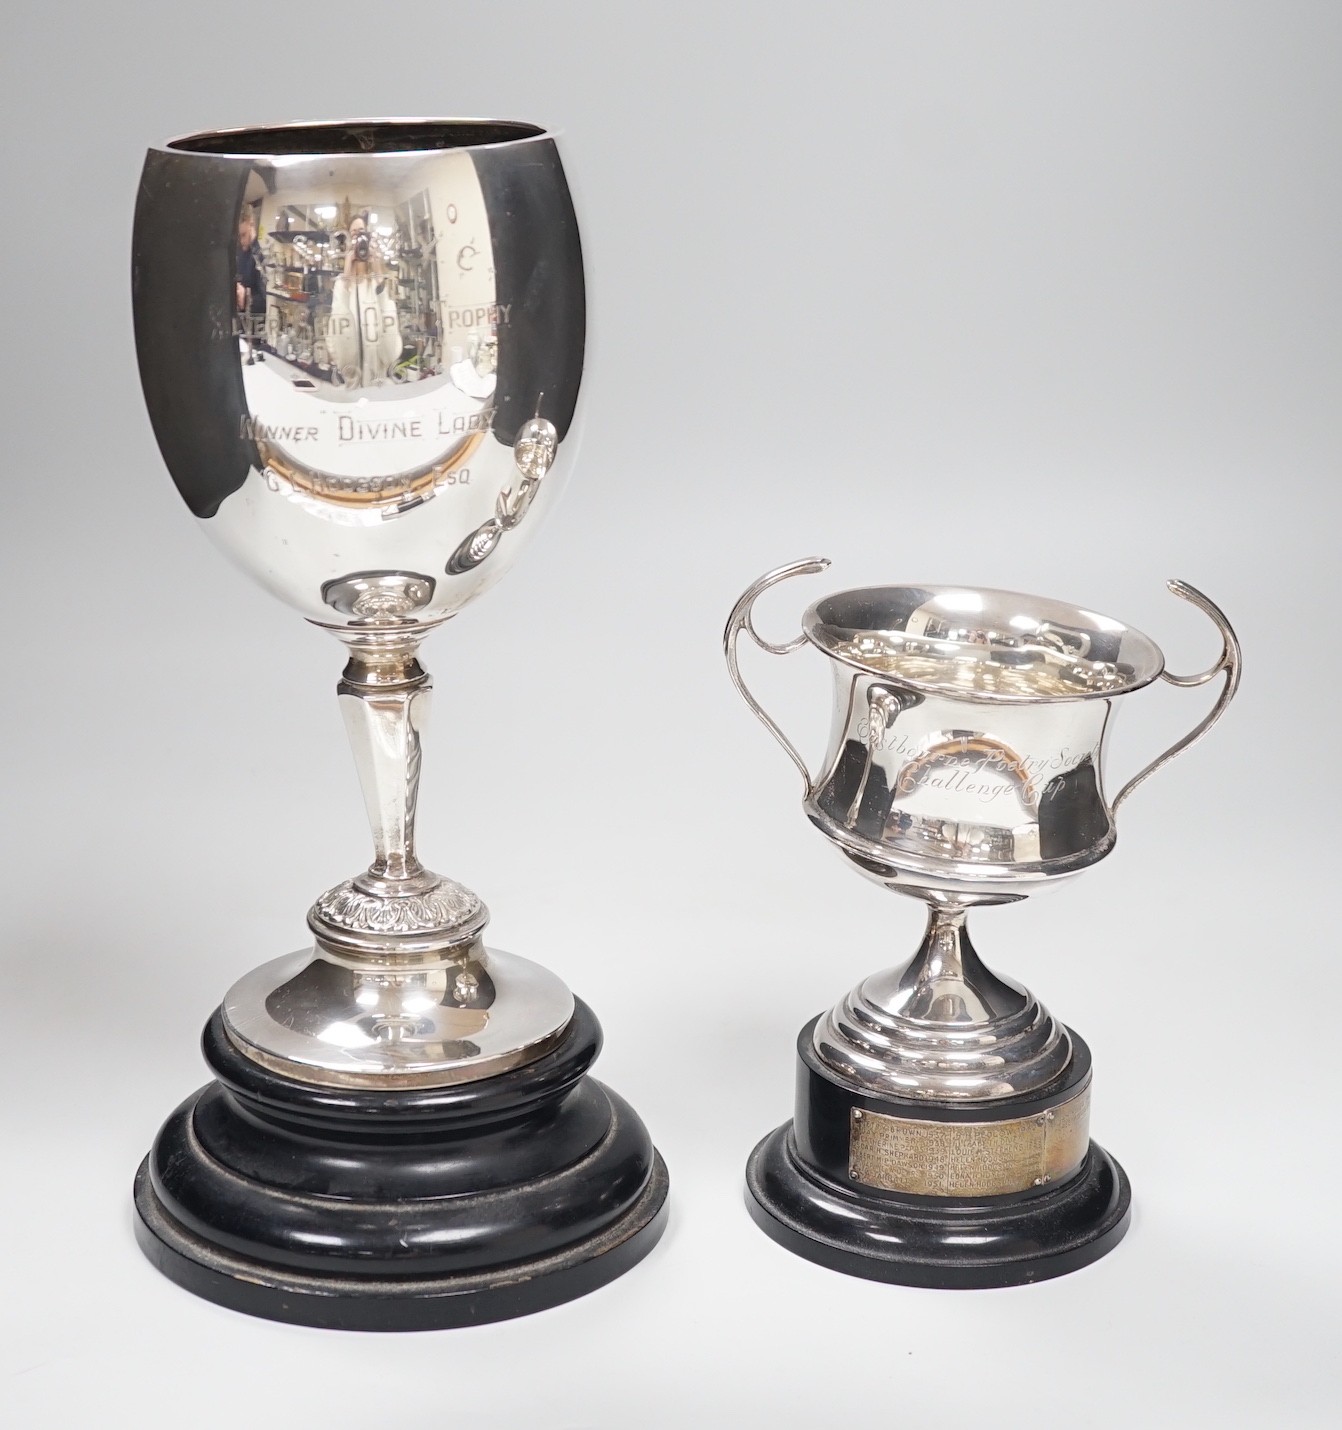 A silver trophy cup inscribed 'Winner Divine Lady', Birmingham 1932, 24.5cm, 10oz and a smaller two handled trophy cup 'Eastbourne Poetry Society Challenge Cup' (London 1914), 5oz